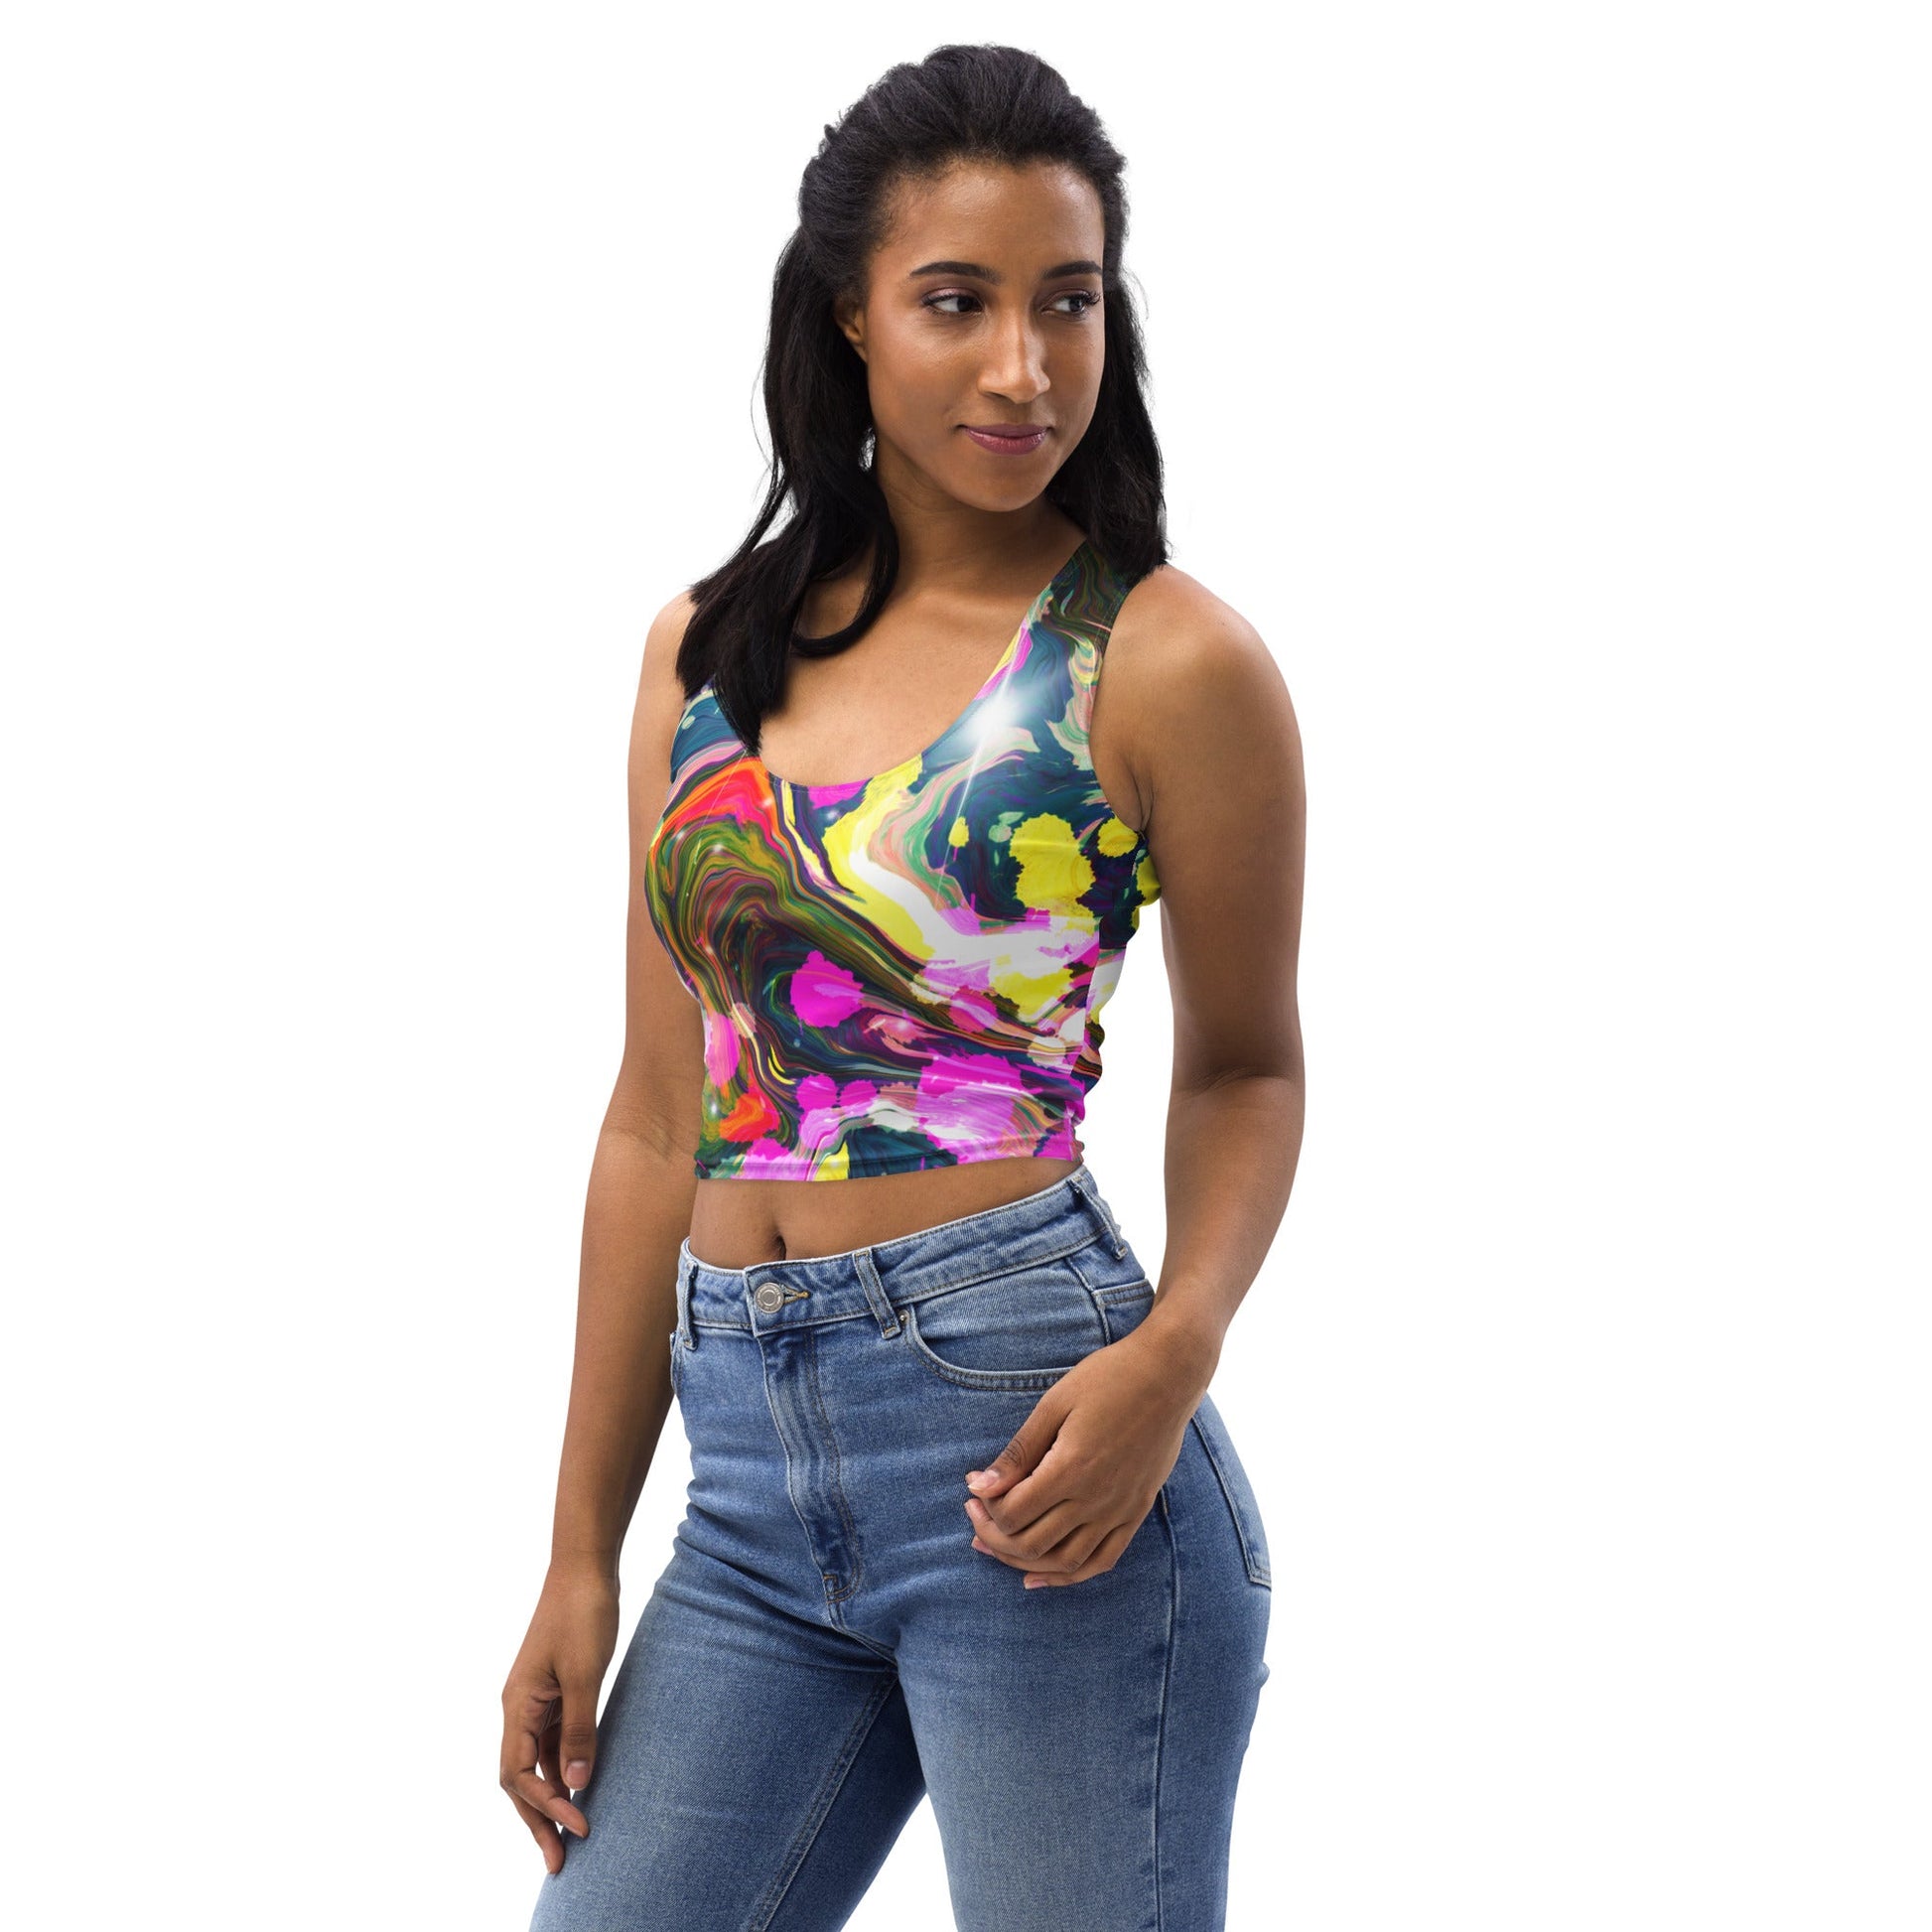 ABSTRACT All-Over Printed Crop Top - Bonotee